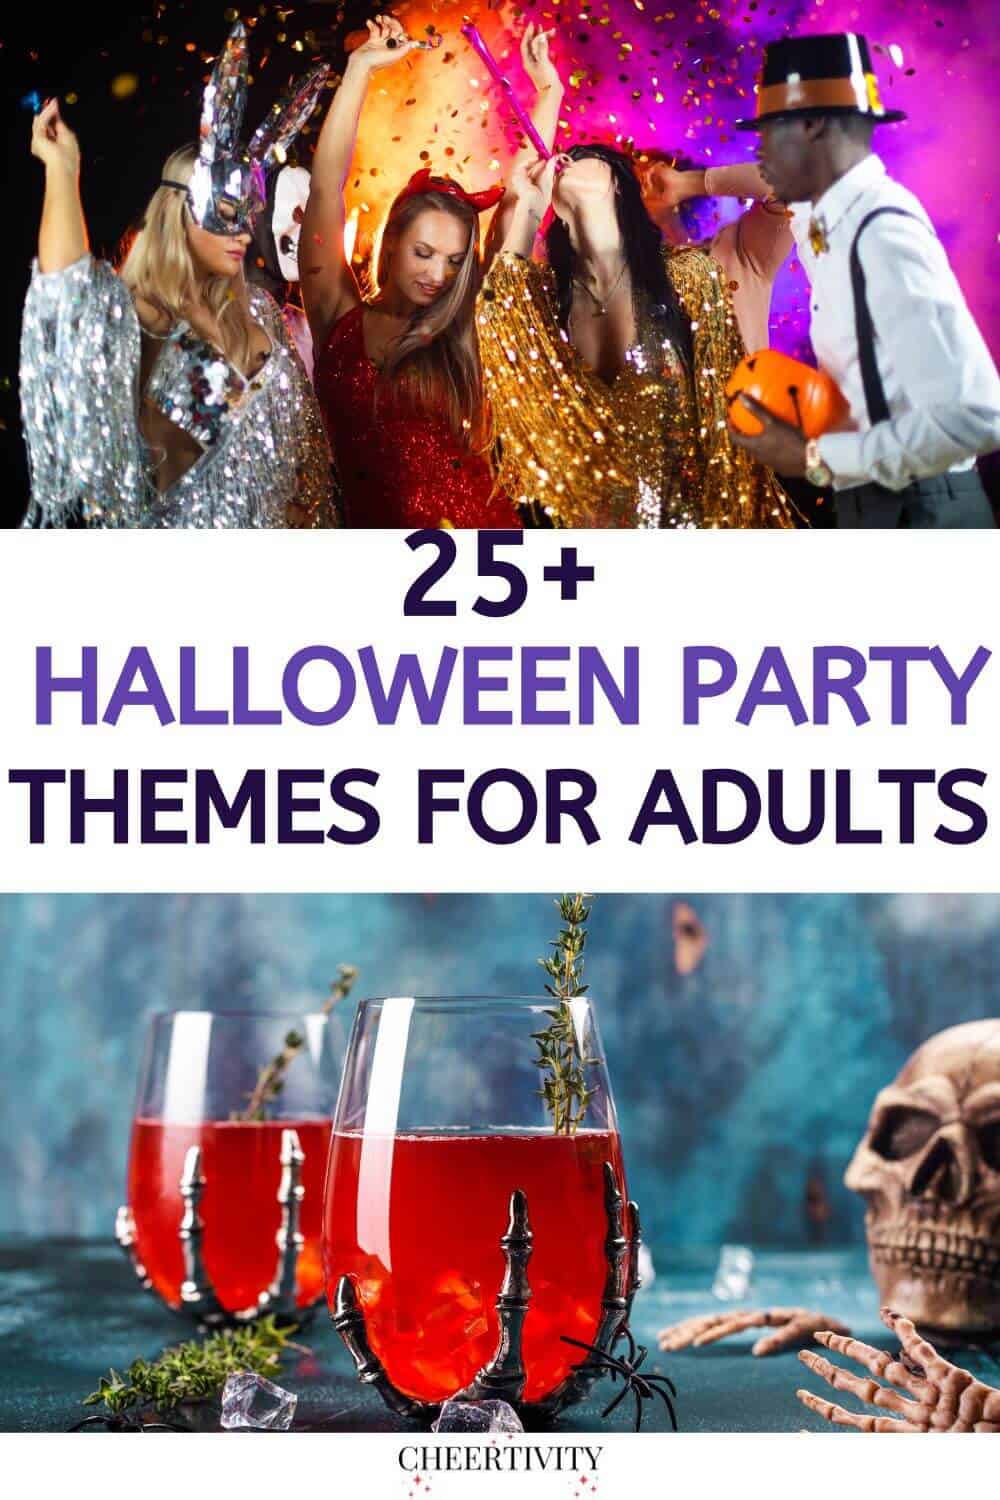 Halloween Party Themes for Adults Ideas